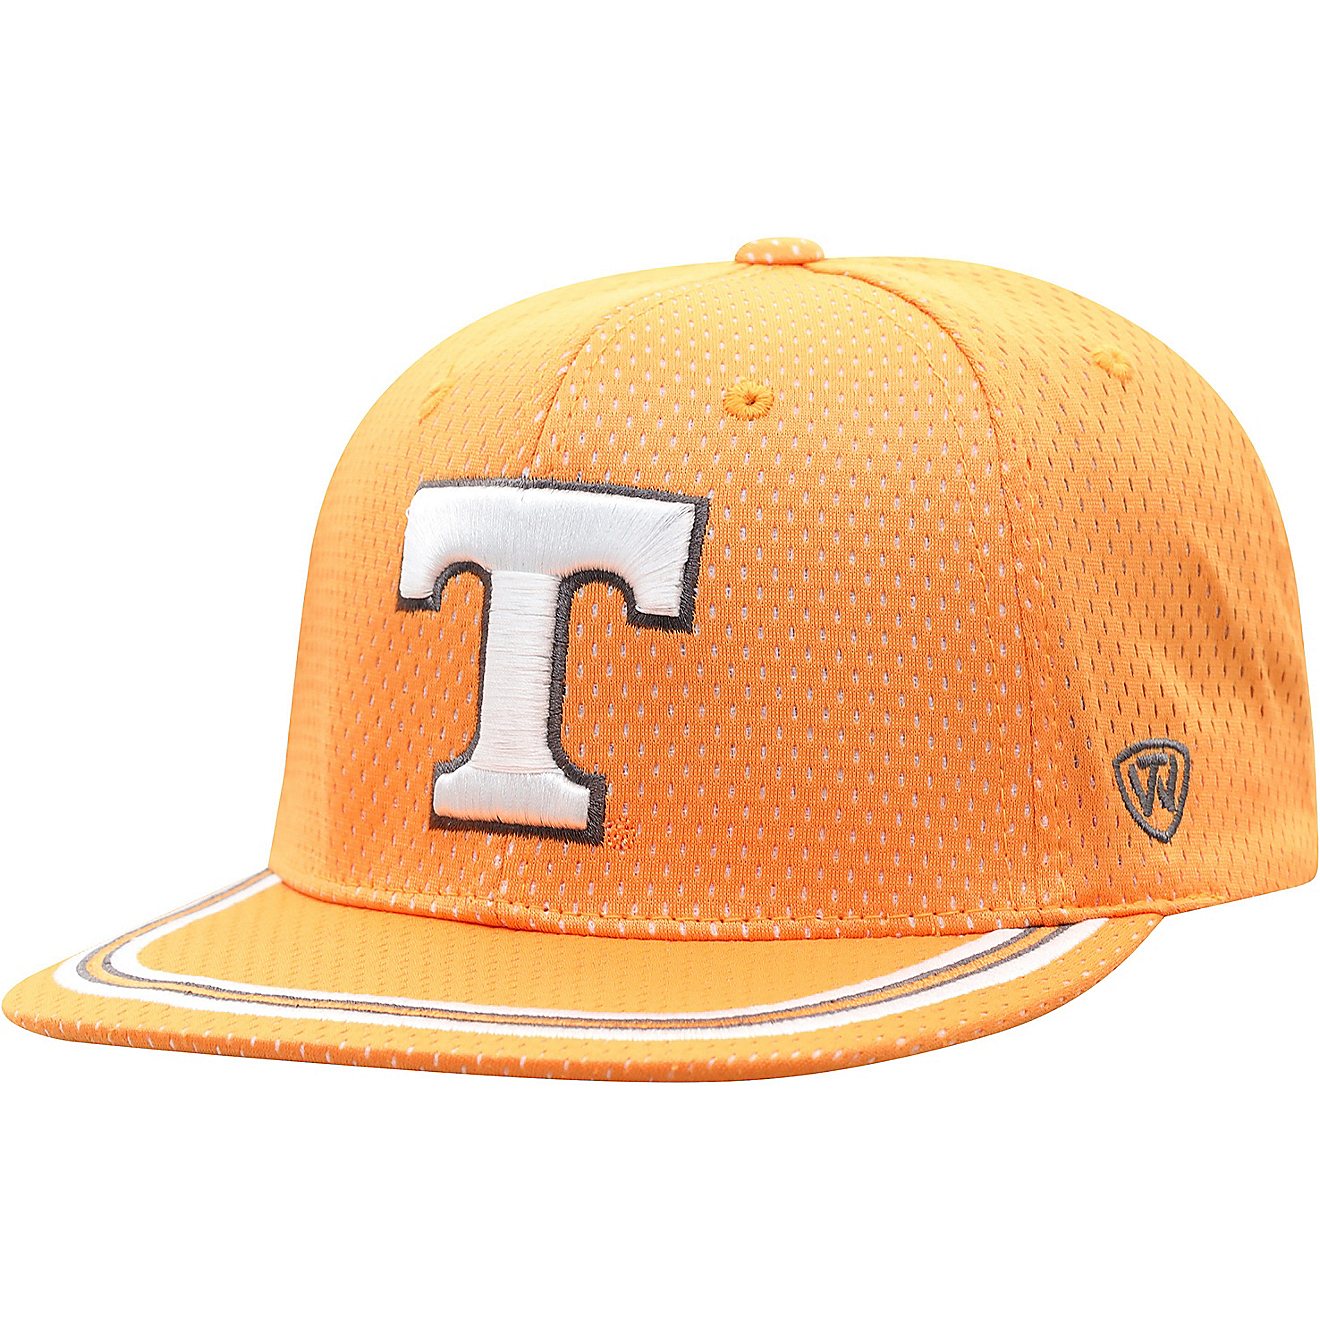 Top of the World Kids' University of Tennessee Spiker Adjustable Cap                                                             - view number 3